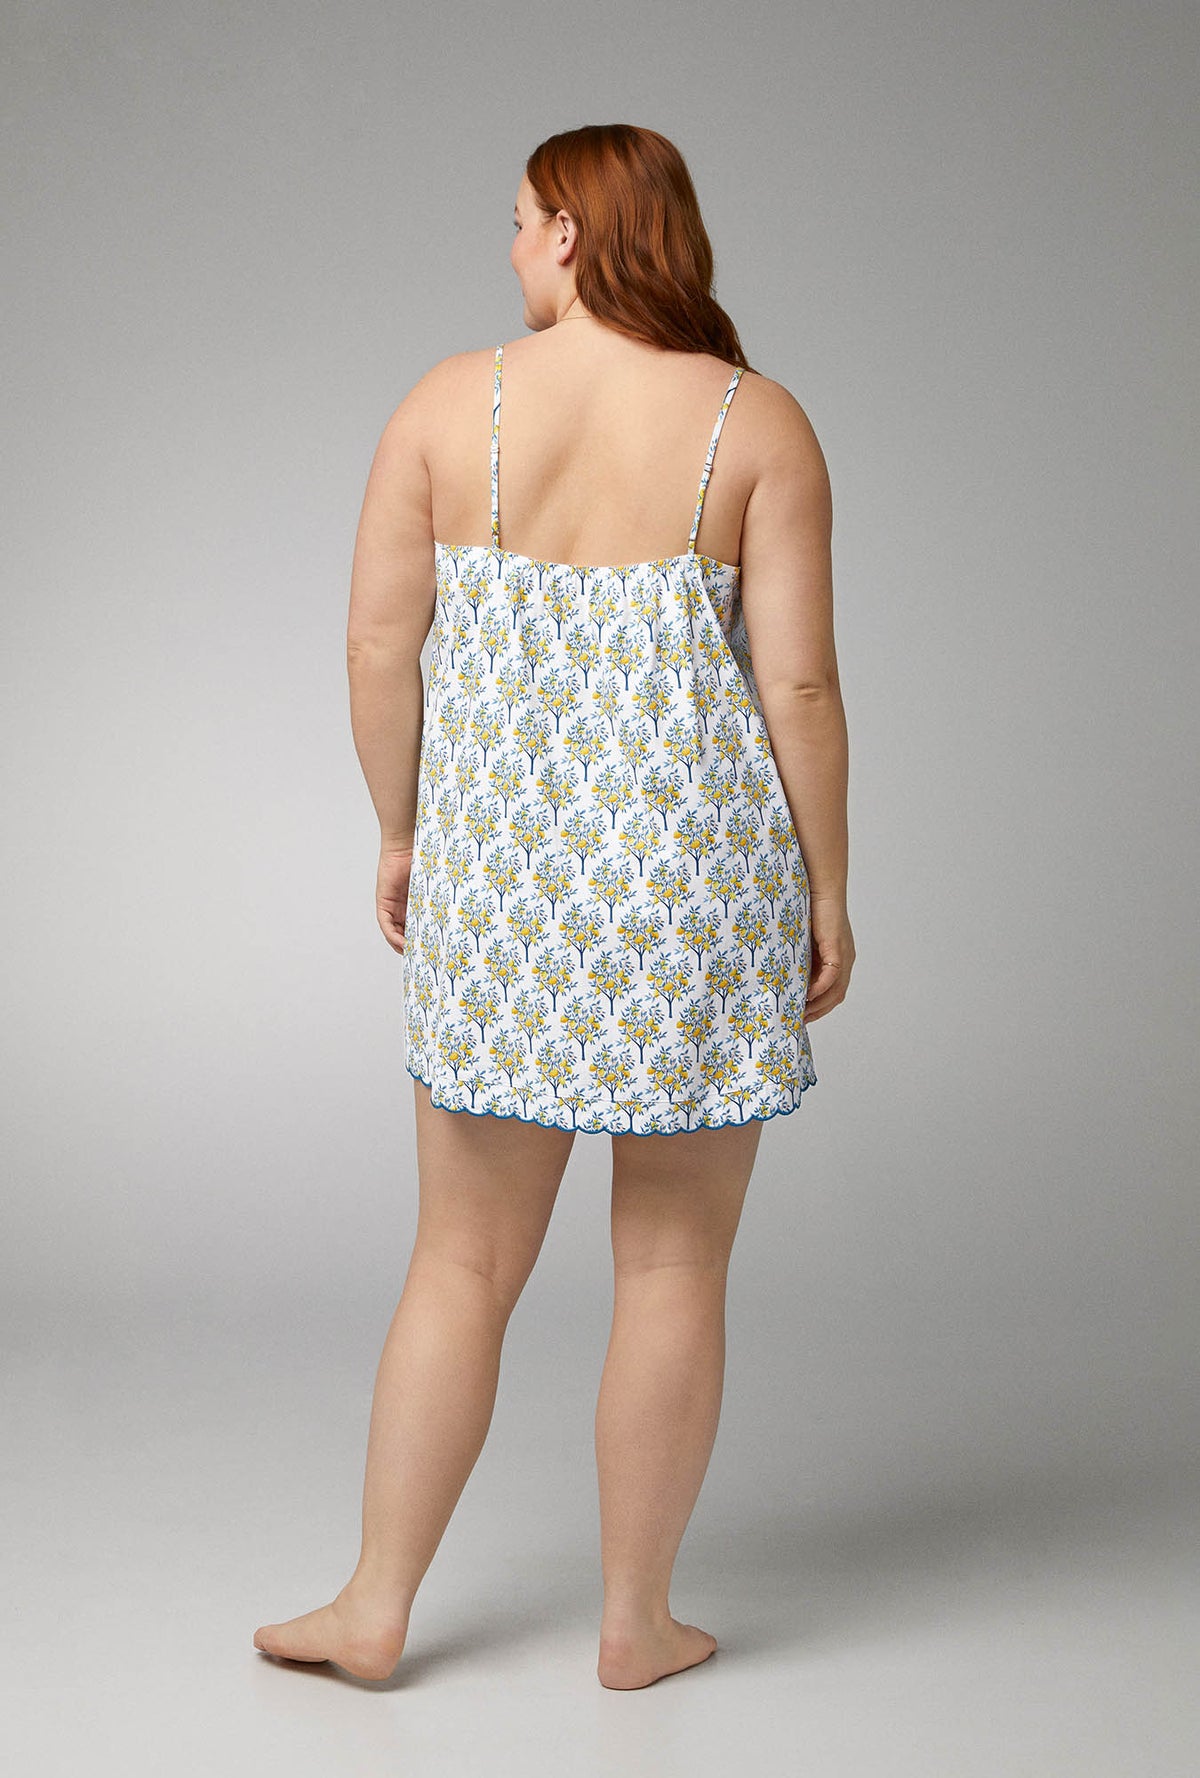 A lady wearing Woven Cotton Poplin Scallop Chemise with Lemon Trees  print